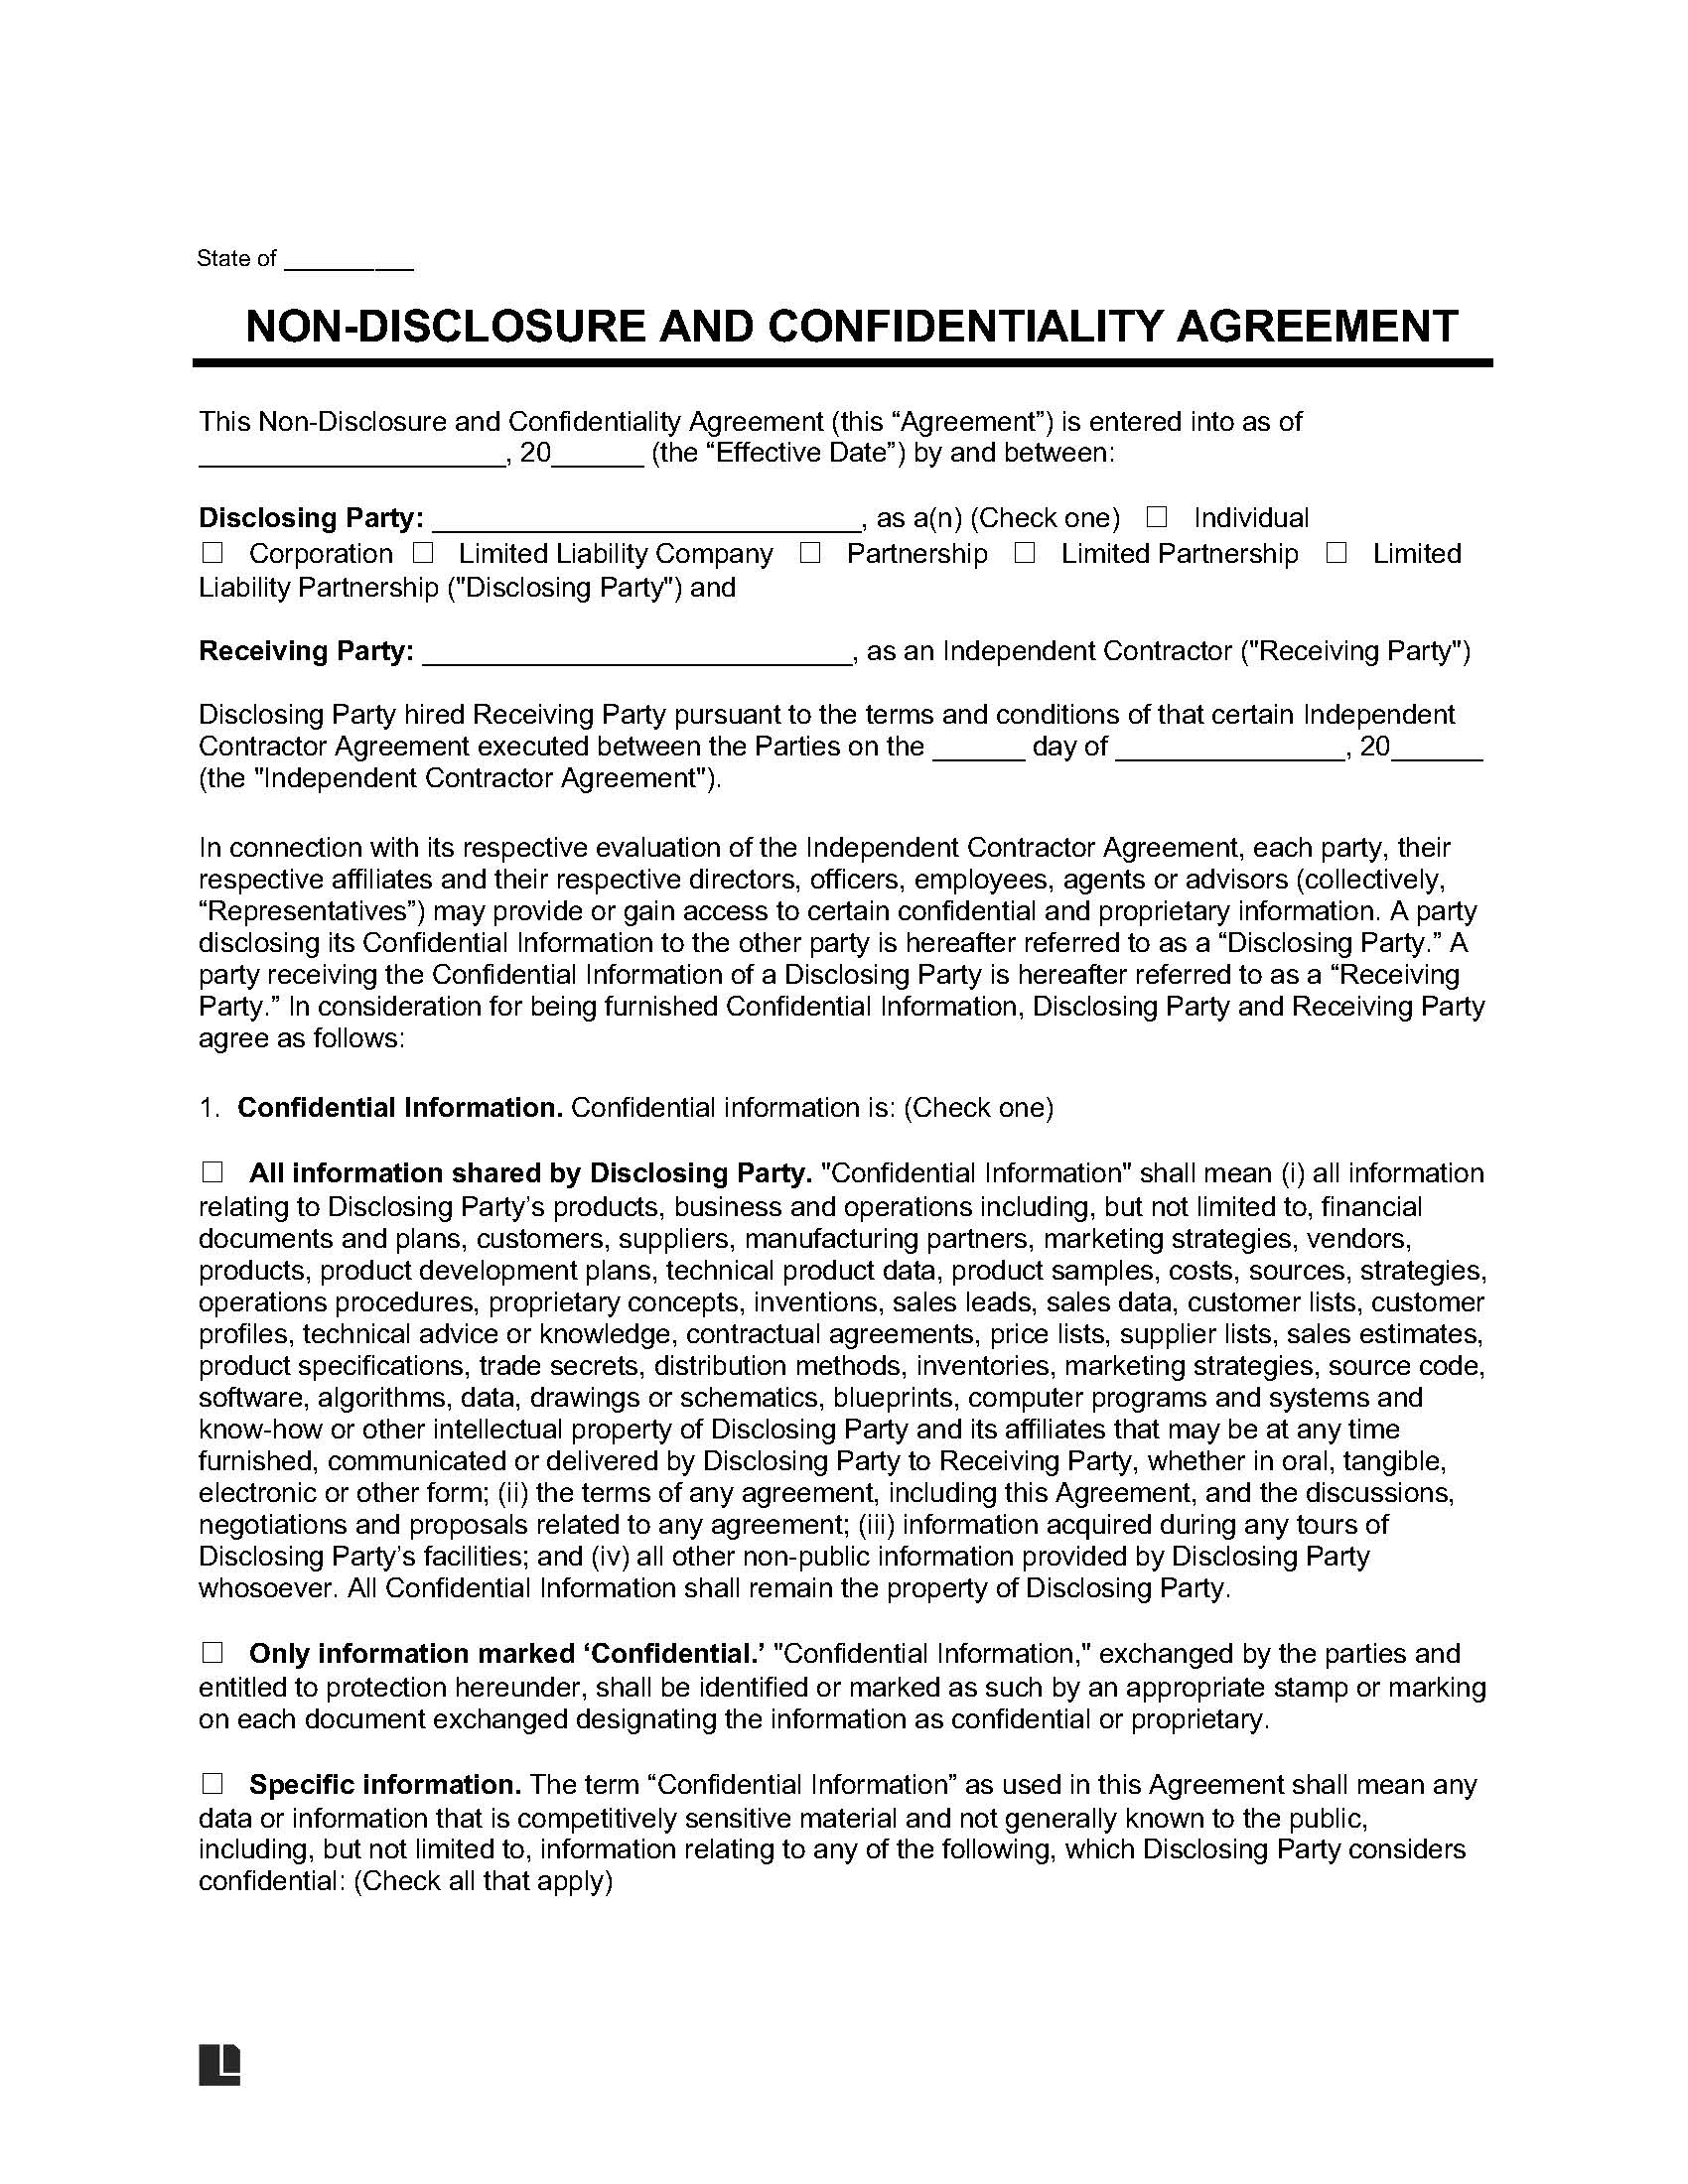 Independent Contractor Non-Disclosure Agreement Sample